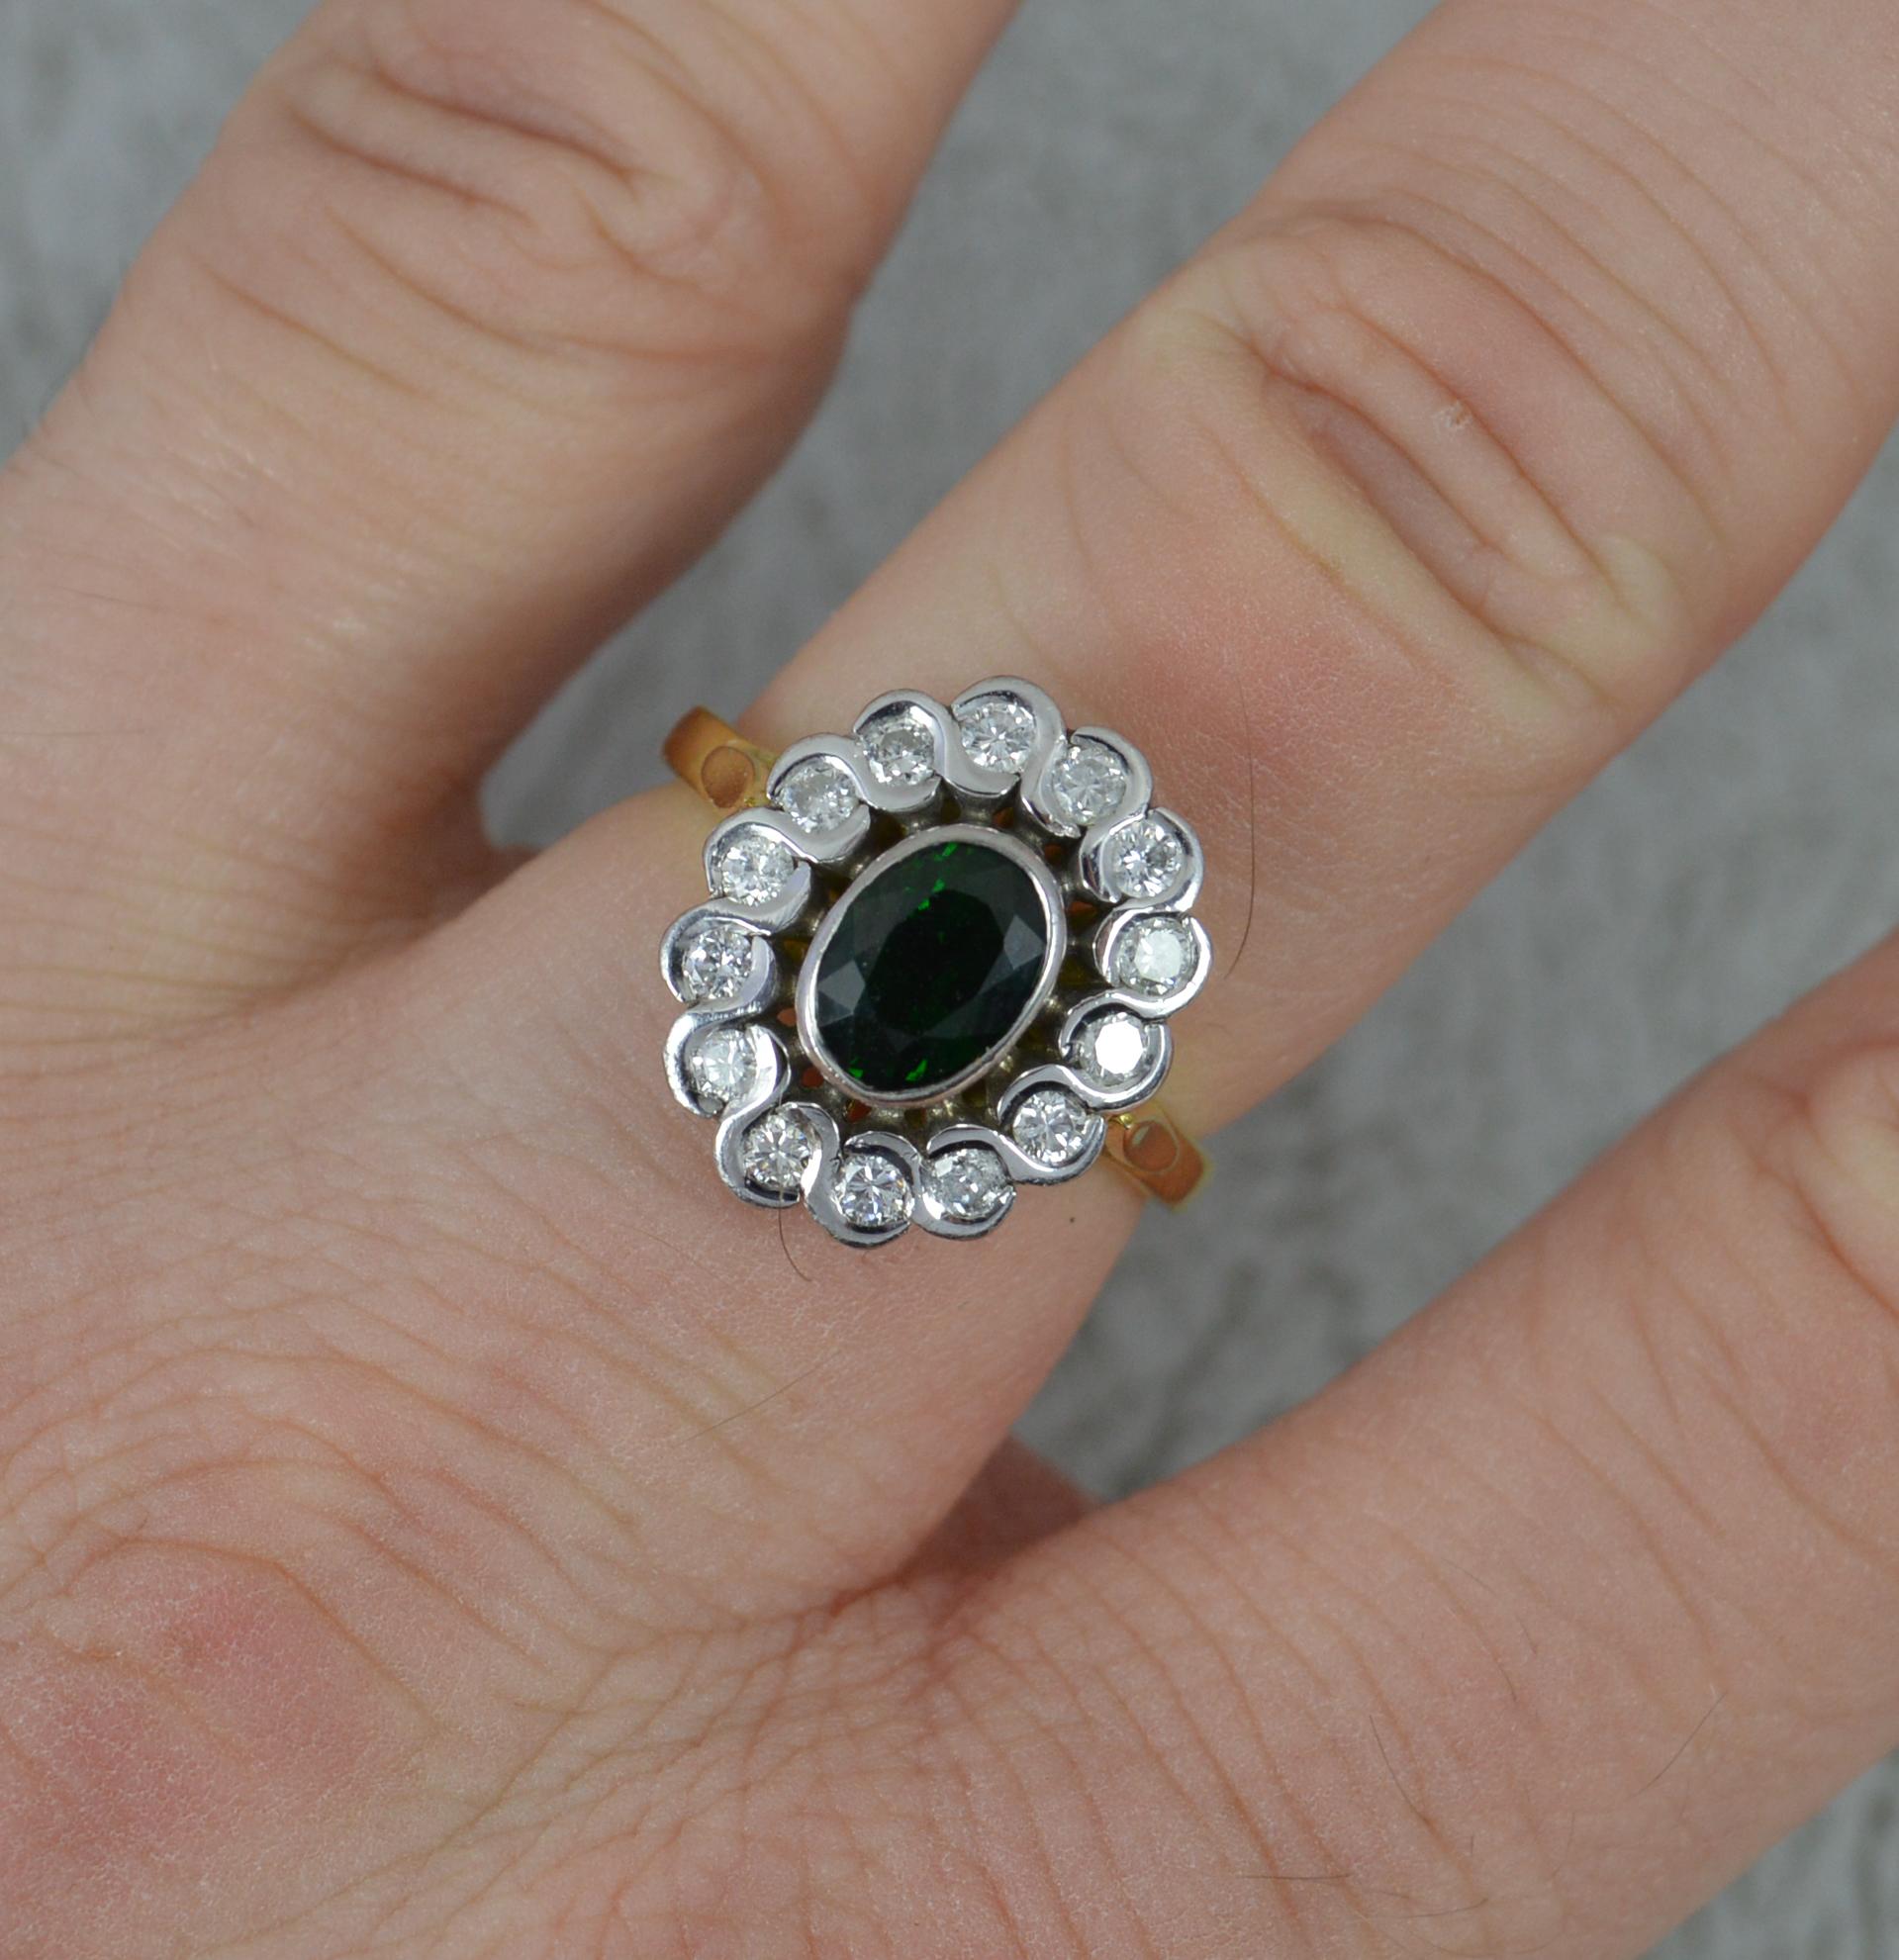 A superb tourmaline and diamond ring.
Solid 18 carat yellow gold shank with white gold head setting.
Designed with an oval cut green tourmaline to the centre and fourteen natural round brilliant cut diamonds surrounding in bezel settings. Approx